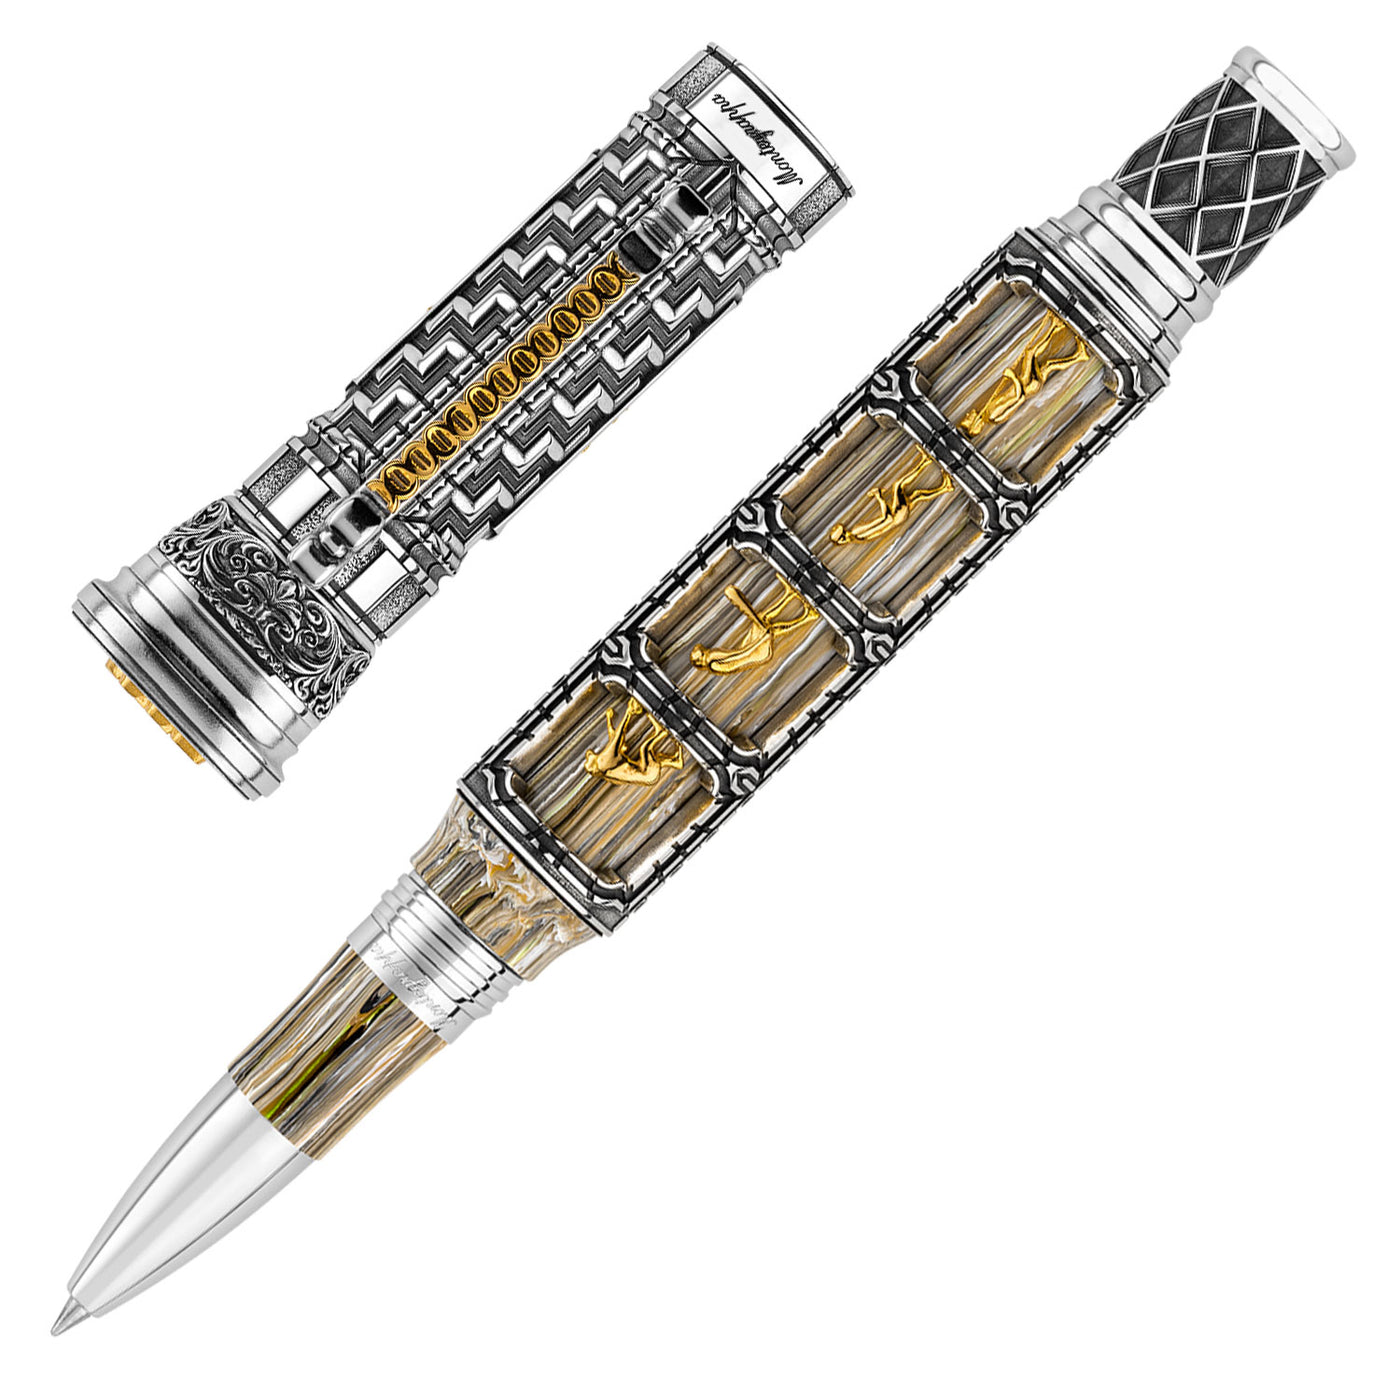 Montegrappa Theory of Evolution Roller Ball Pen - Avanguardia (Limited Edition) 1